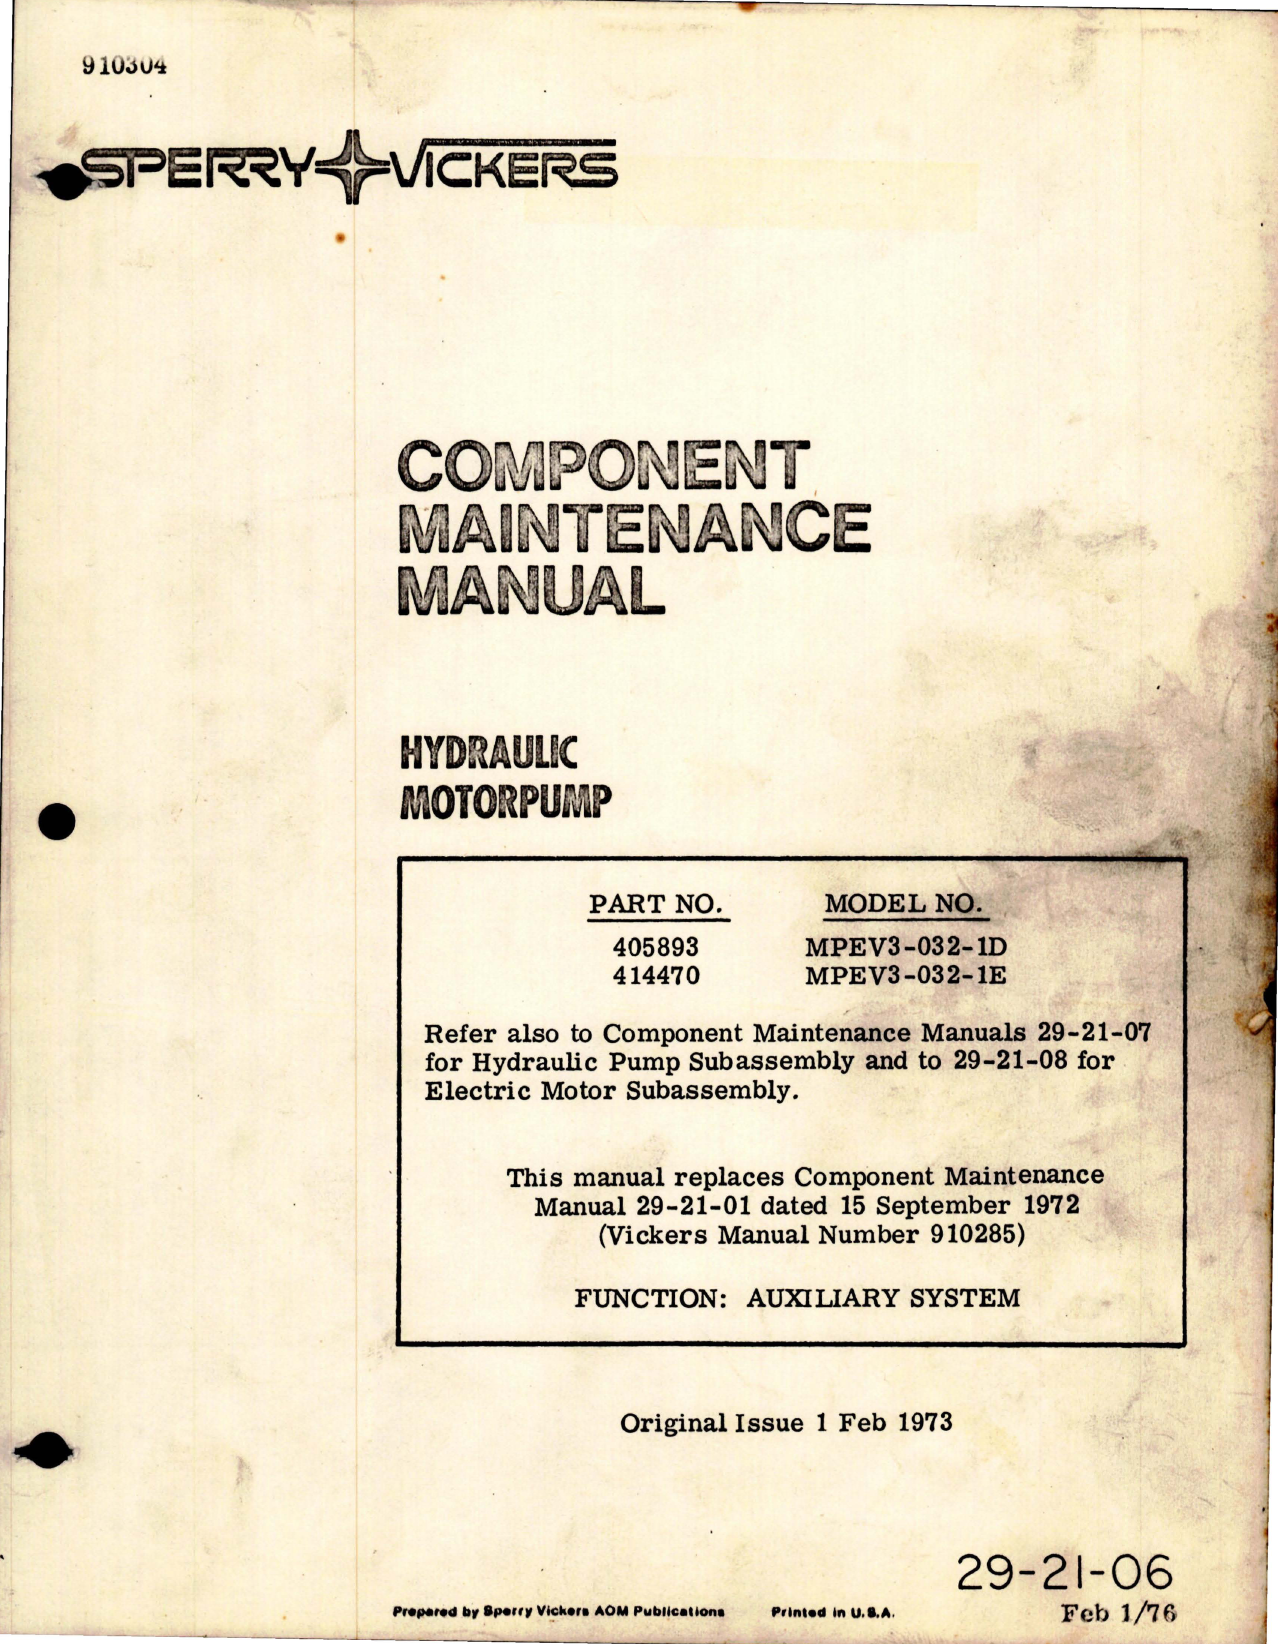 Sample page 1 from AirCorps Library document: Component Maintenance Manuals for Hydraulic Motorpump - Parts 405893 and 414470 